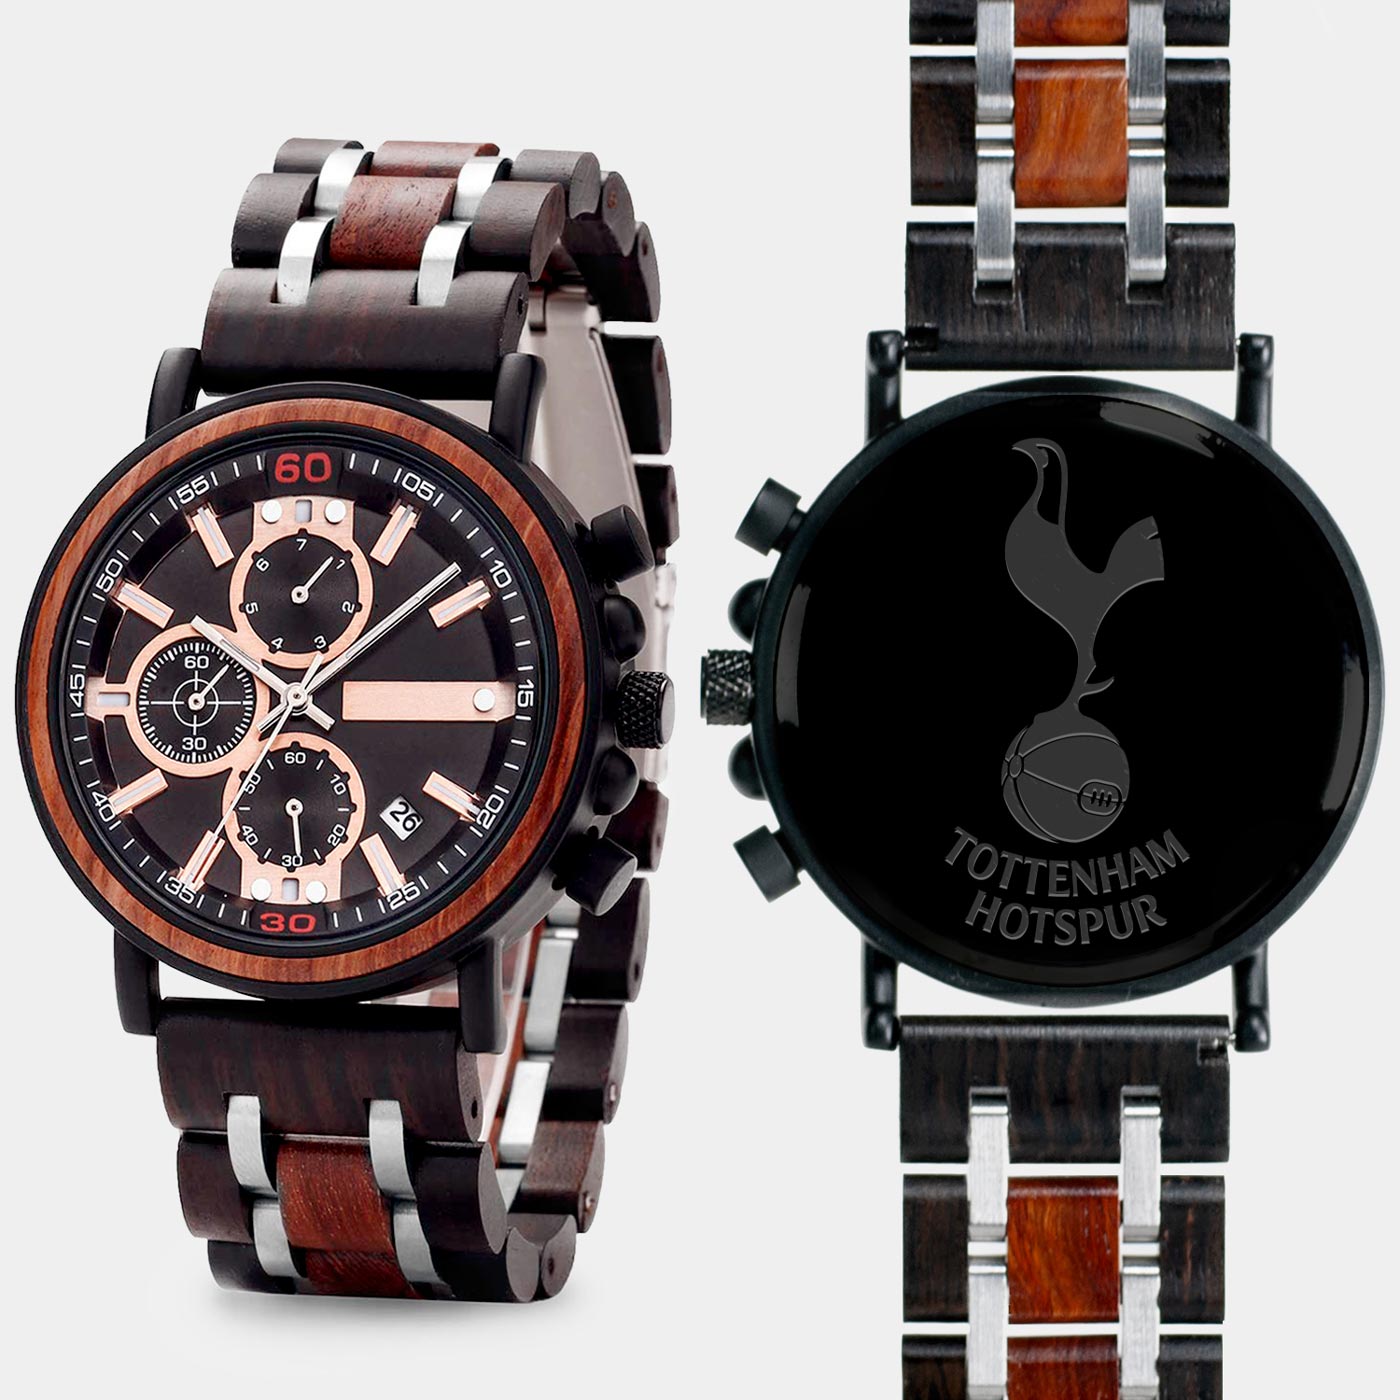 Tottenham Hotspur F.C. Mens Wrist Watch  - Personalized Tottenham Hotspur F.C. Mens Watches - Custom Gifts For Him, Birthday Gifts, Gift For Dad - Best 2022 Tottenham Hotspur F.C. Christmas Gifts - Black 45mm FC Wood Watch